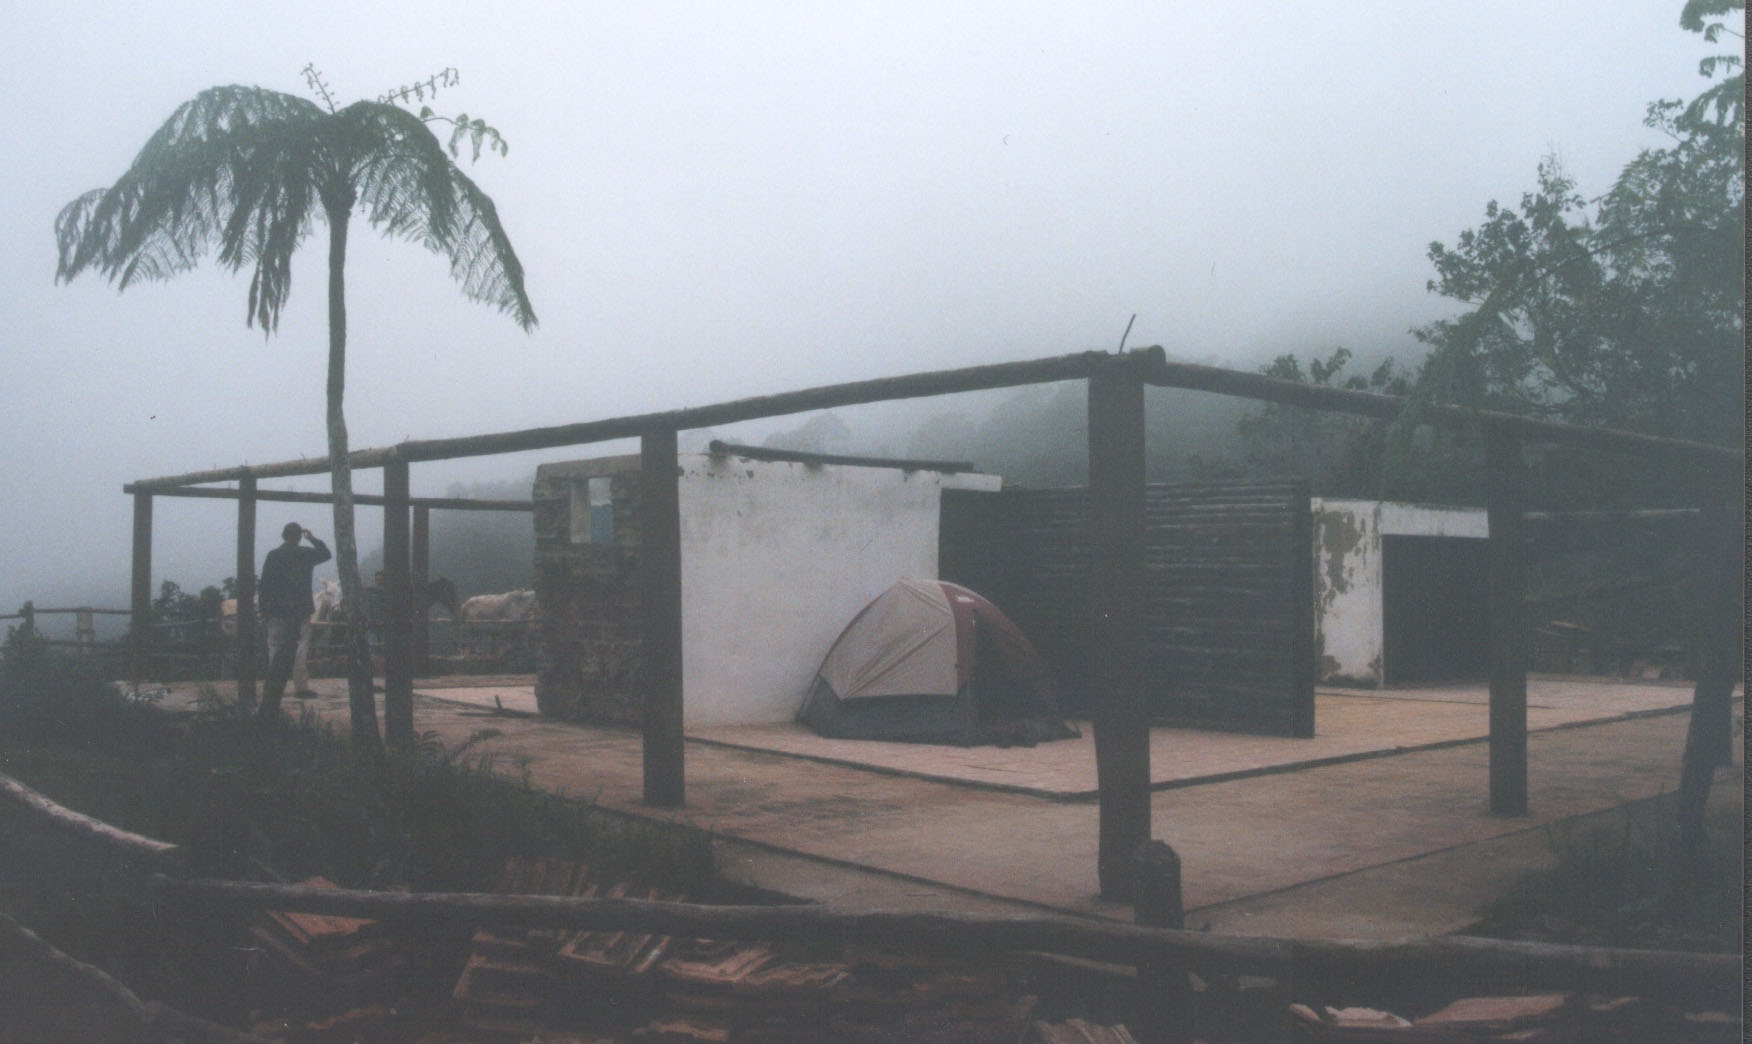 A wet early morning: camping in the destroyed remains of the old field station at La Sabina, Alturas de Banao